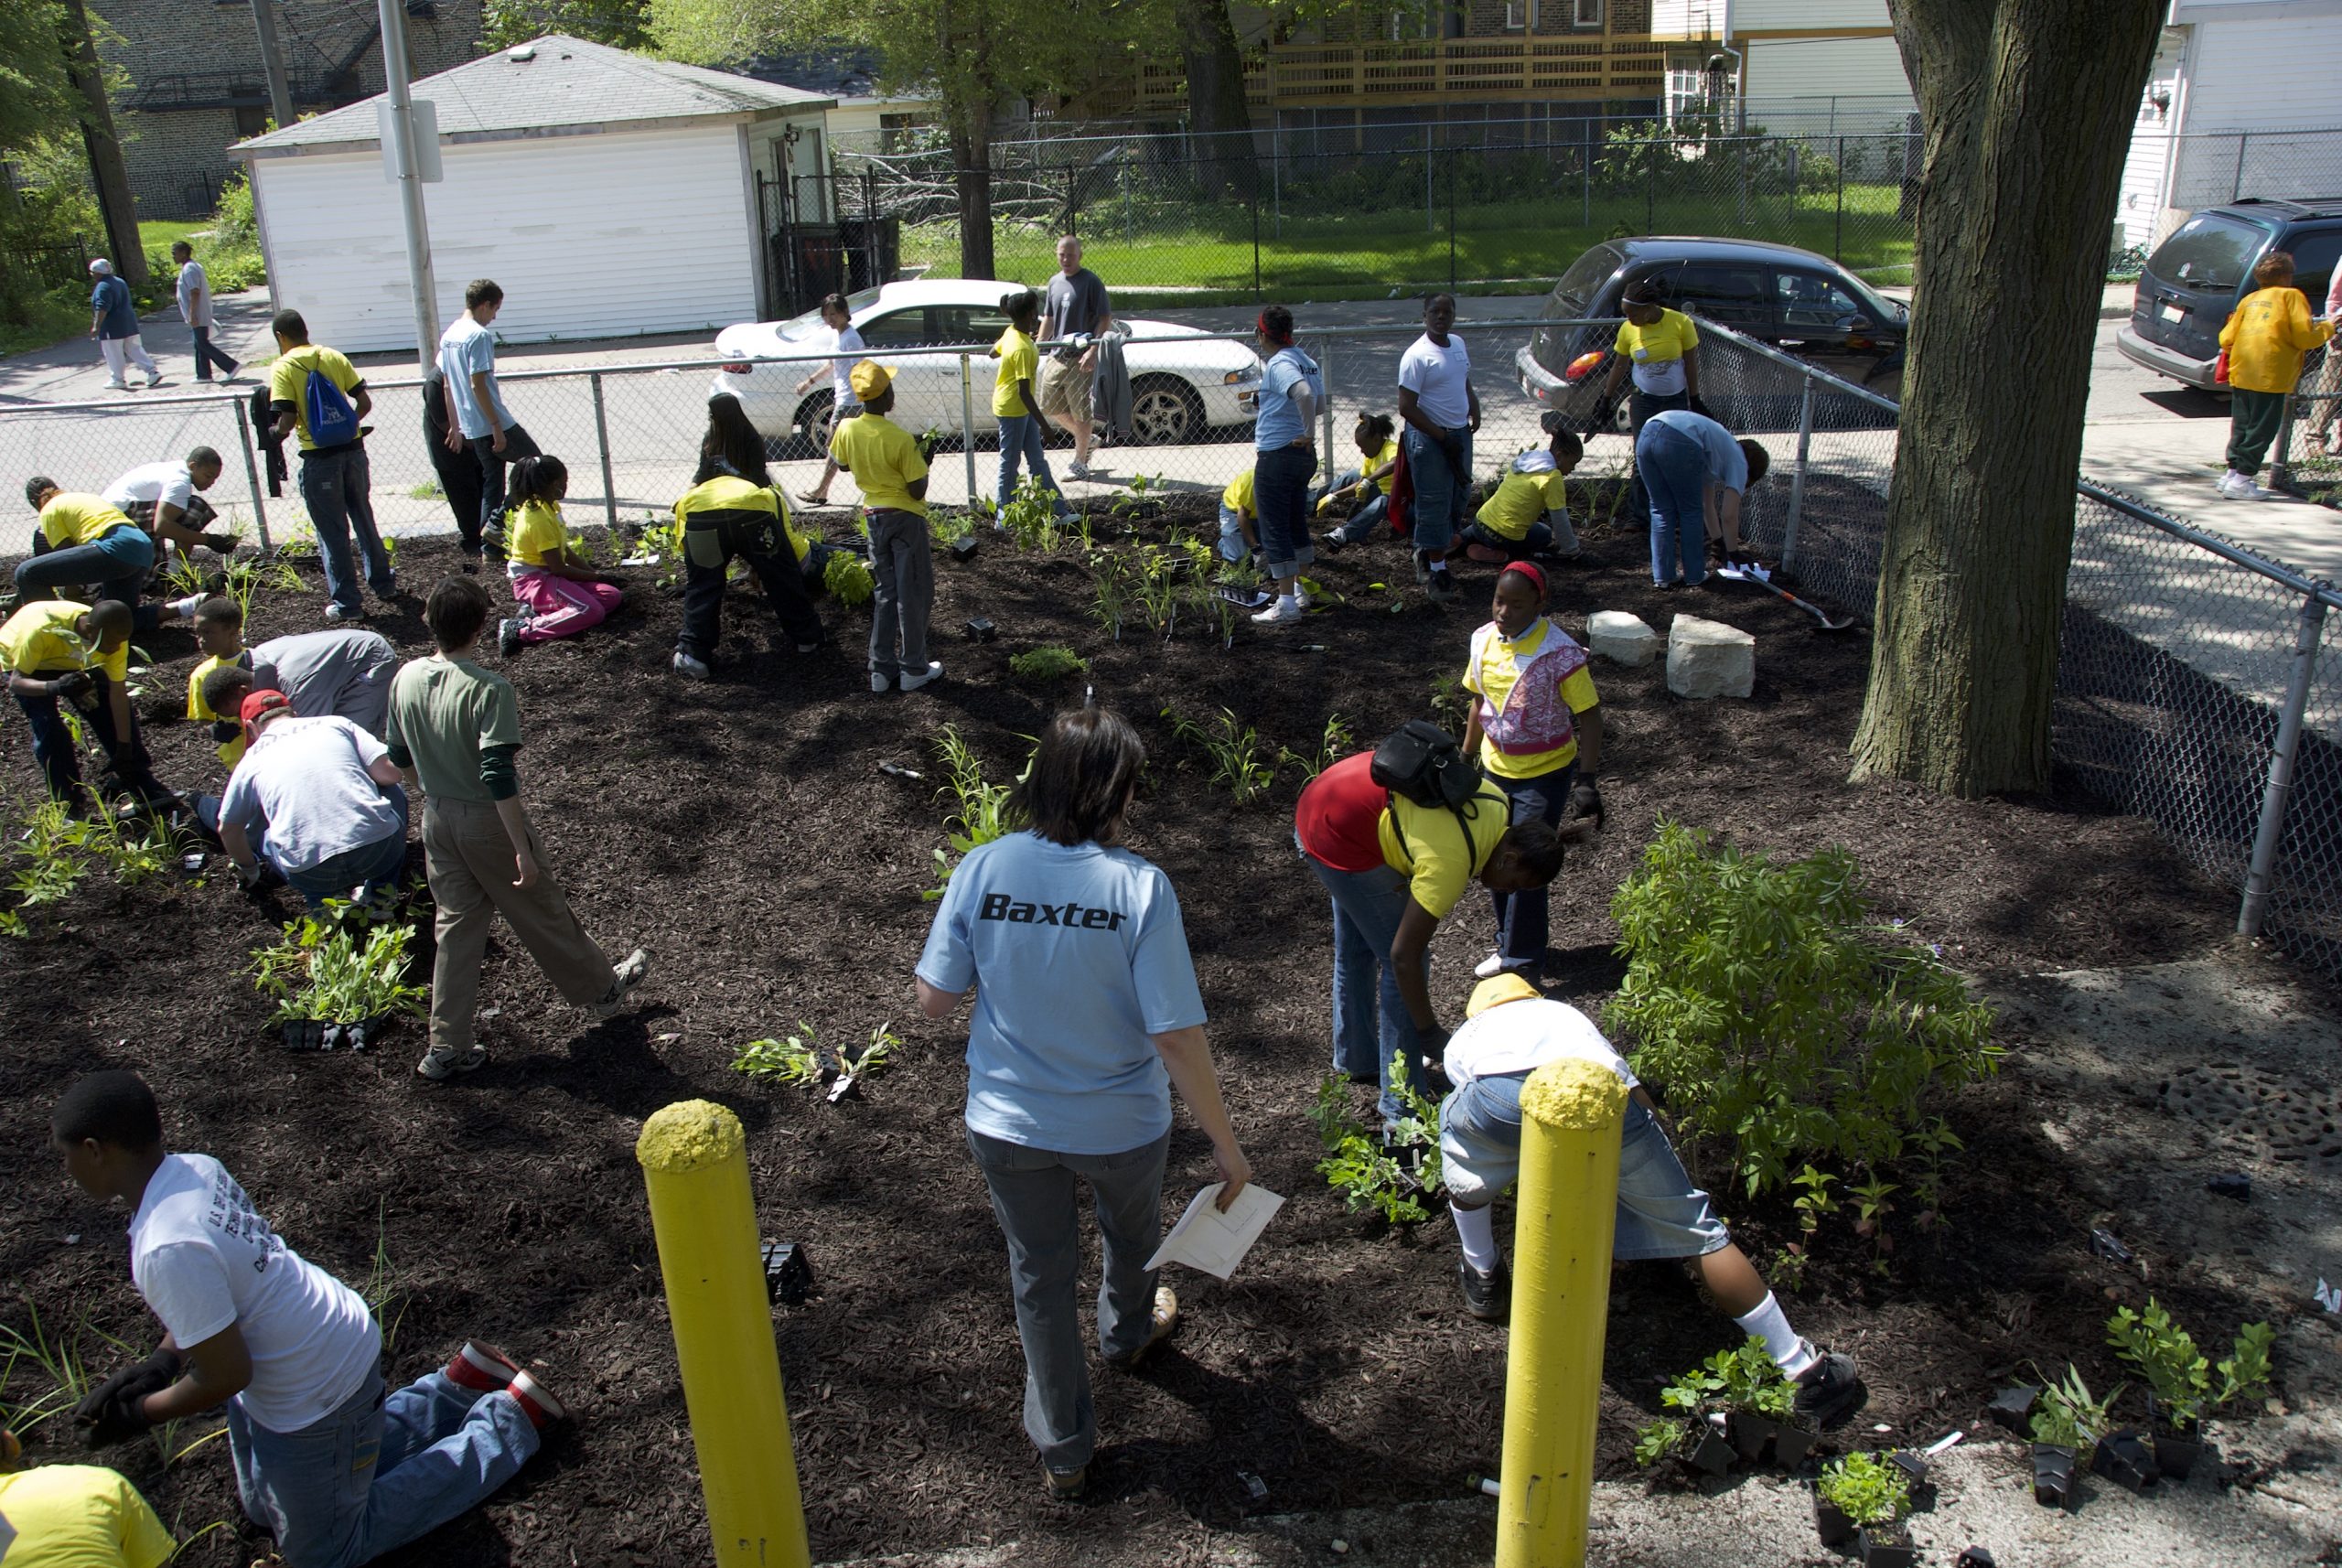 birds-eye-view of people hard at work planting native plants